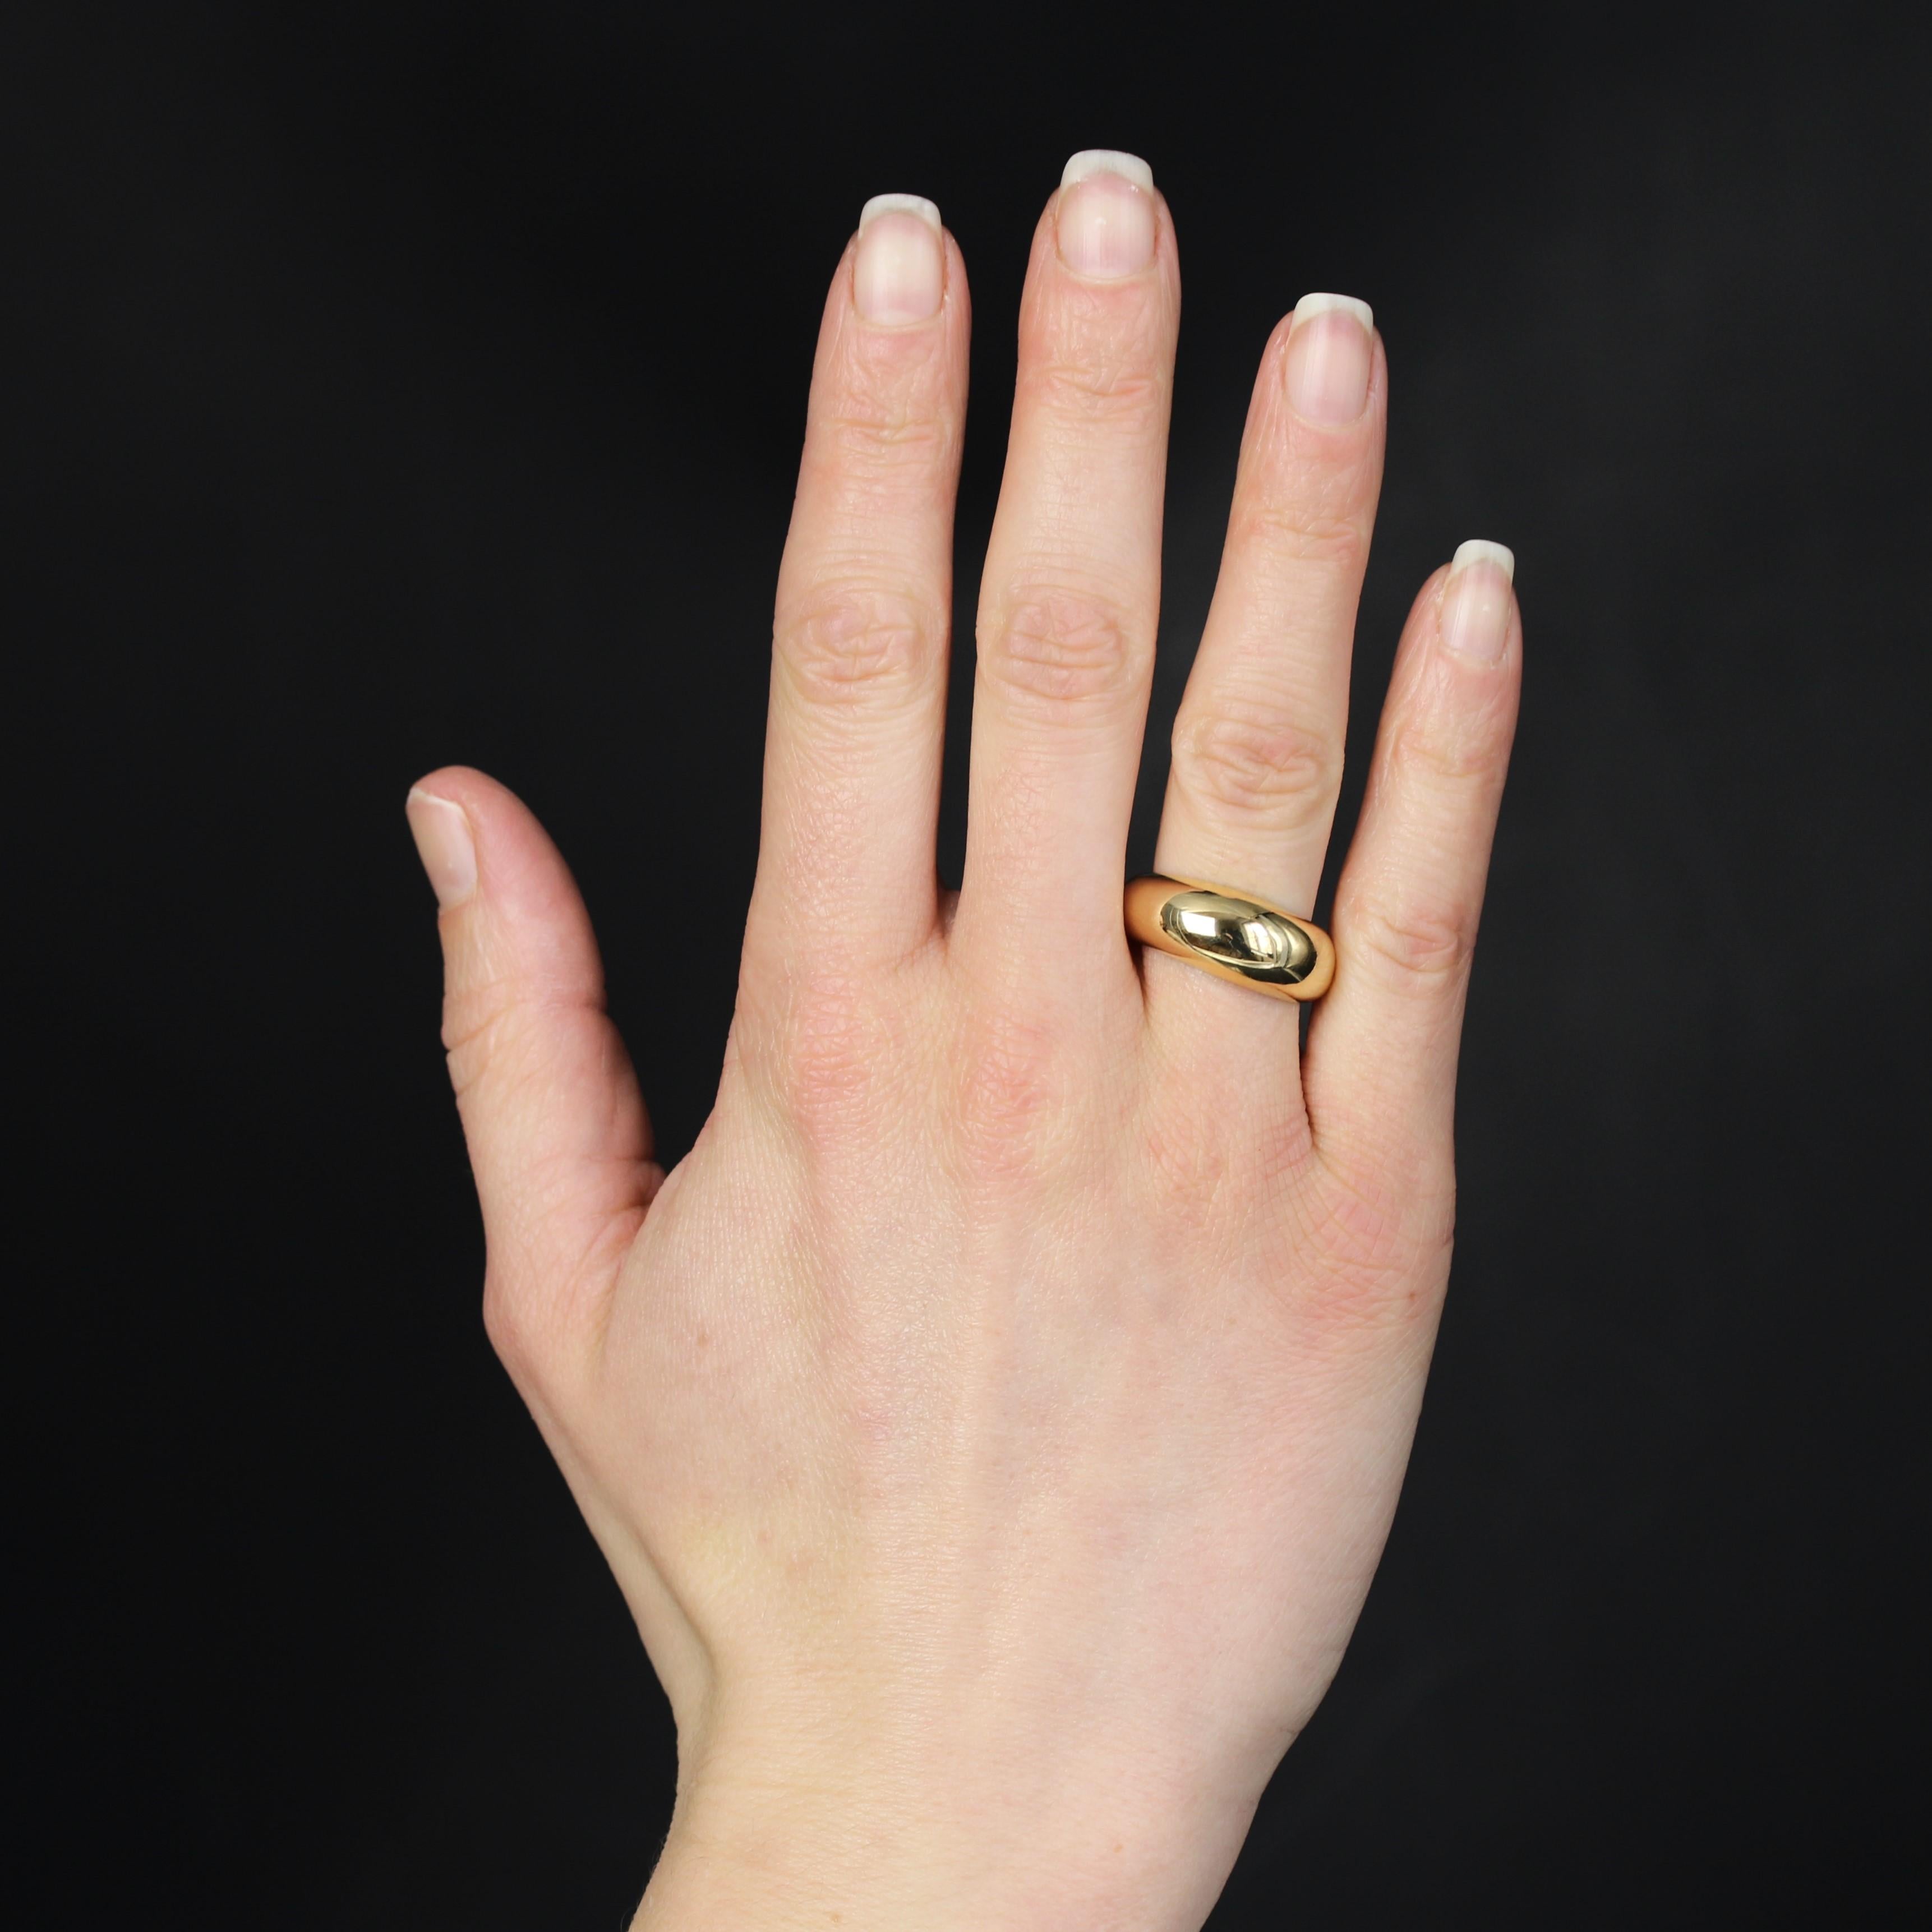 Ring in 18 karat yellow gold, eagle head hallmark.
This yellow gold ring has a domed top.
Height : 9 mm approximately, thickness : 4 mm approximately, width of the ring at the base : 4 mm approximately.
Total weight of the jewel : 6 g